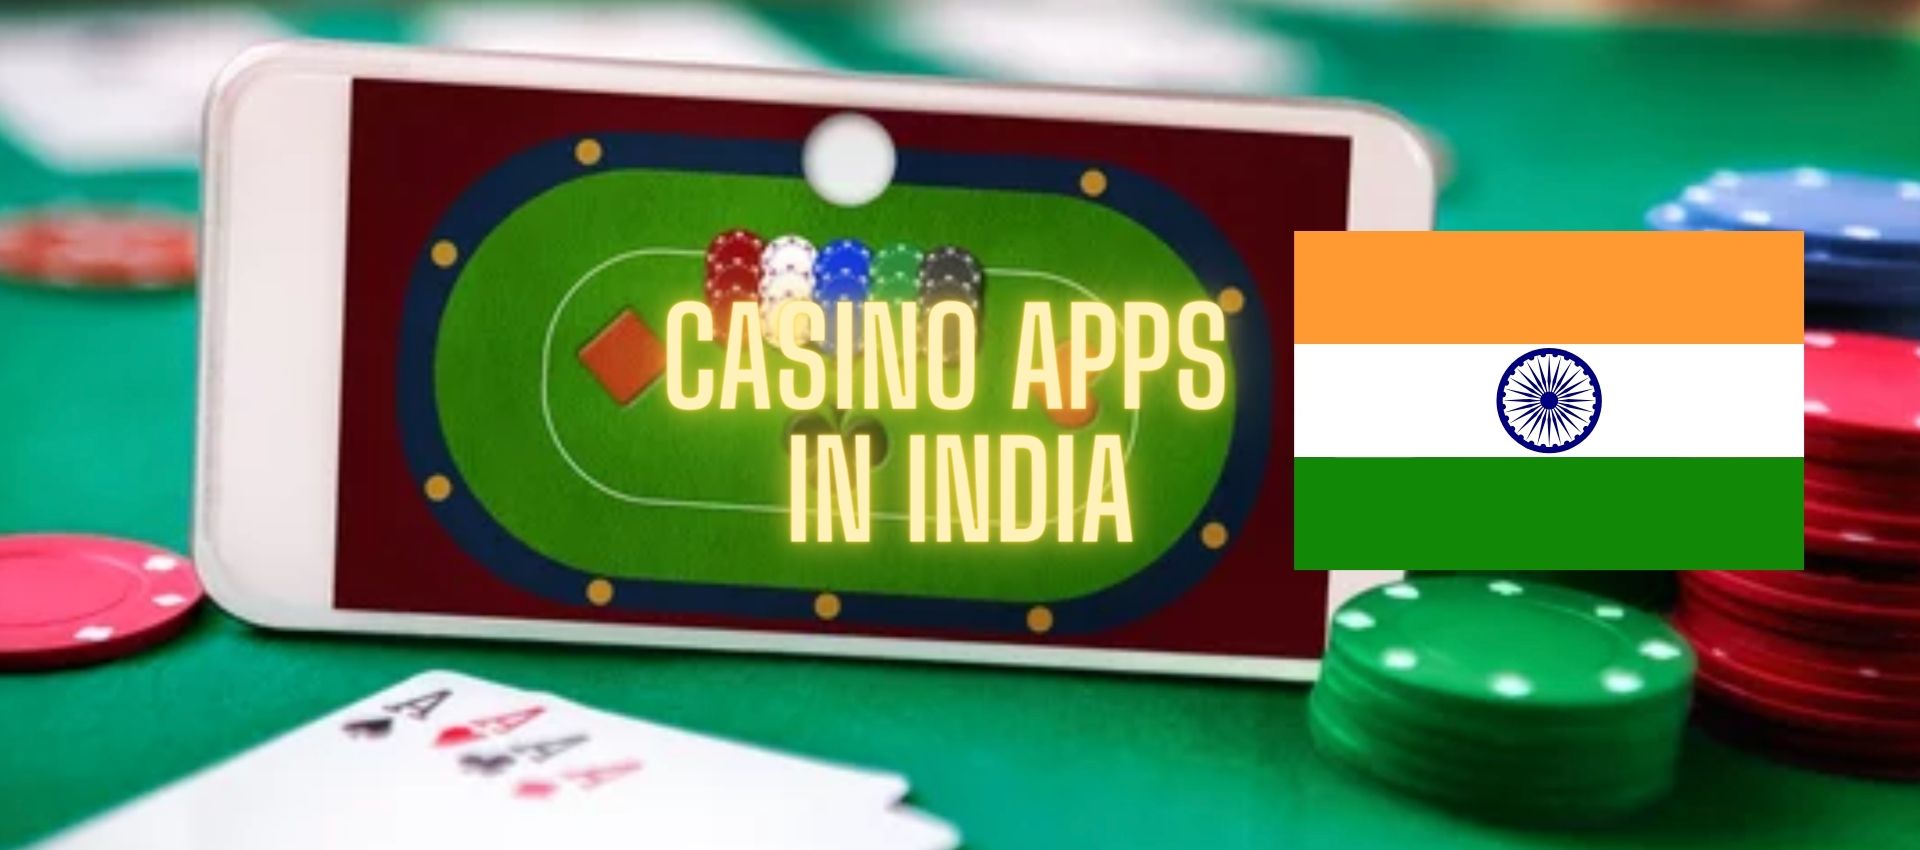 Casino apps list for playing from India